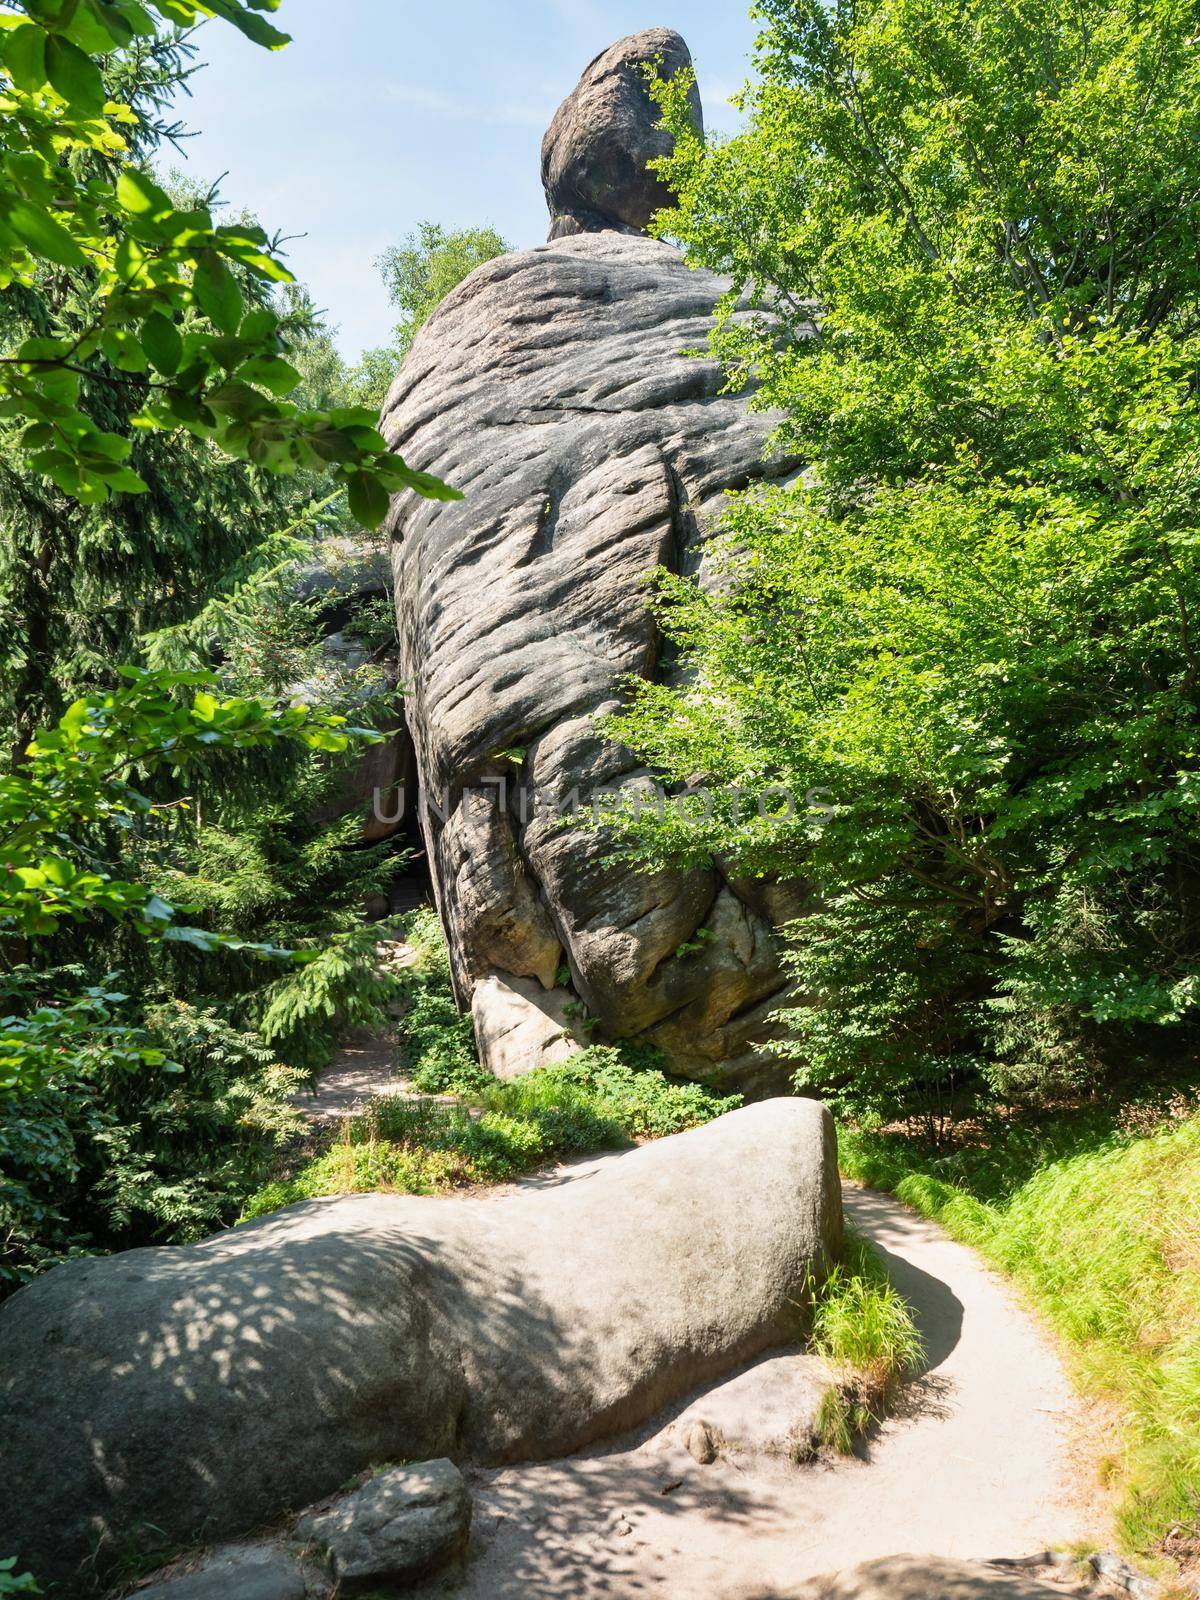 The Fat man rock. The symbol of stony guardian at tourist path by rdonar2